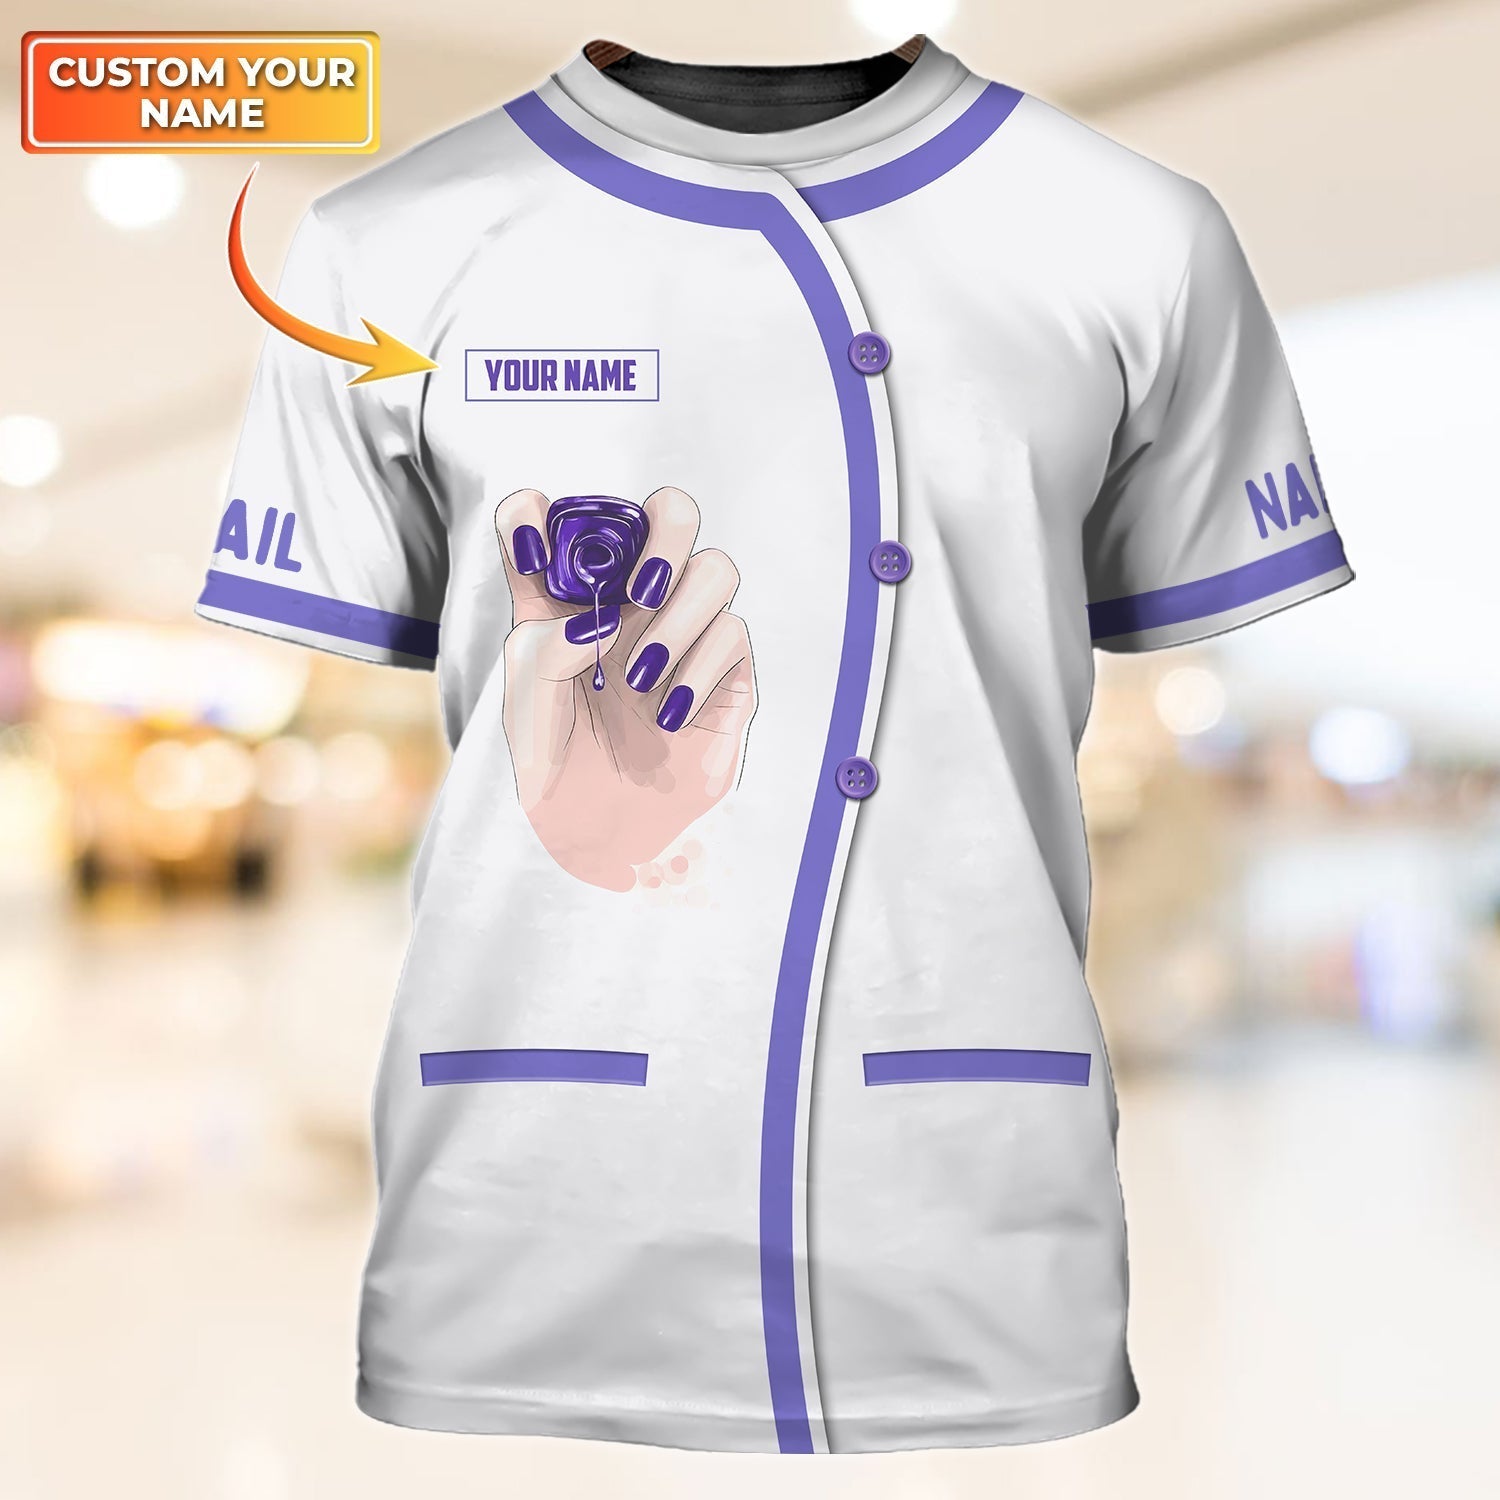 Customized 3D Full Printed Tshirt For Nail Technician/ Best Shirt For Nail Men Women/ Nail Shirts